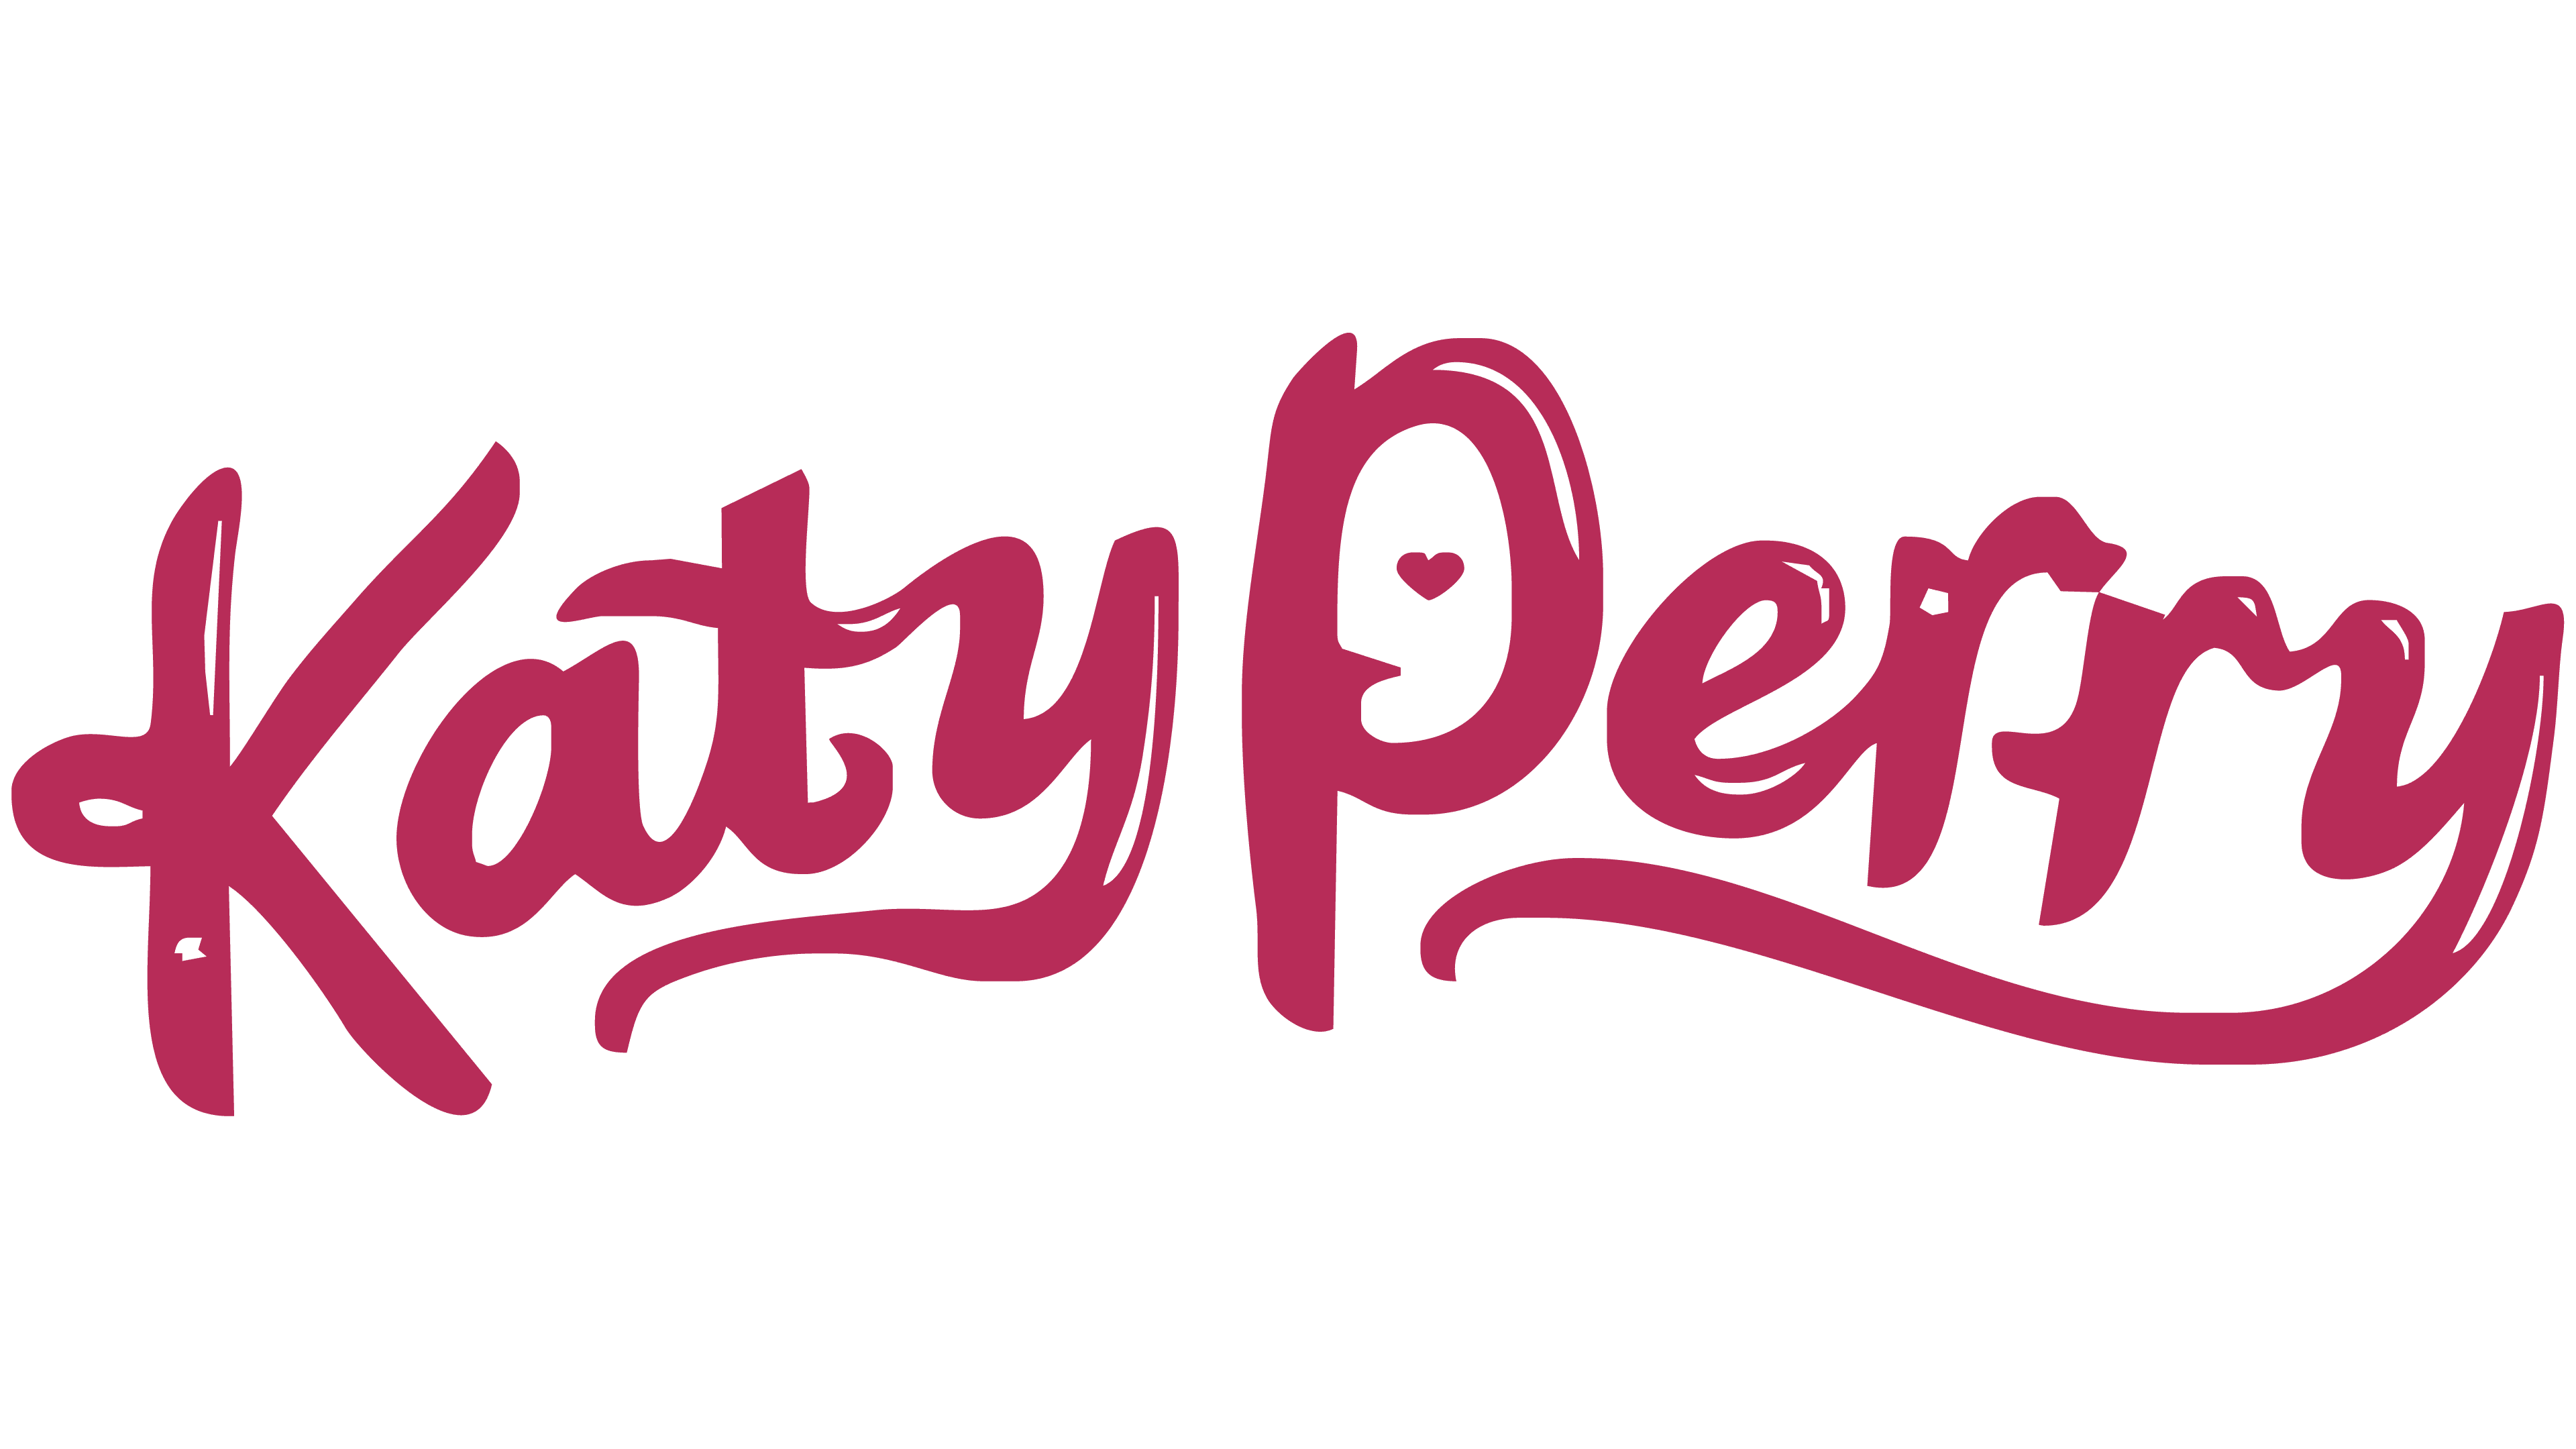 Katy Perry Logo Png Sticker Transparent Png Borderize | Images and ...